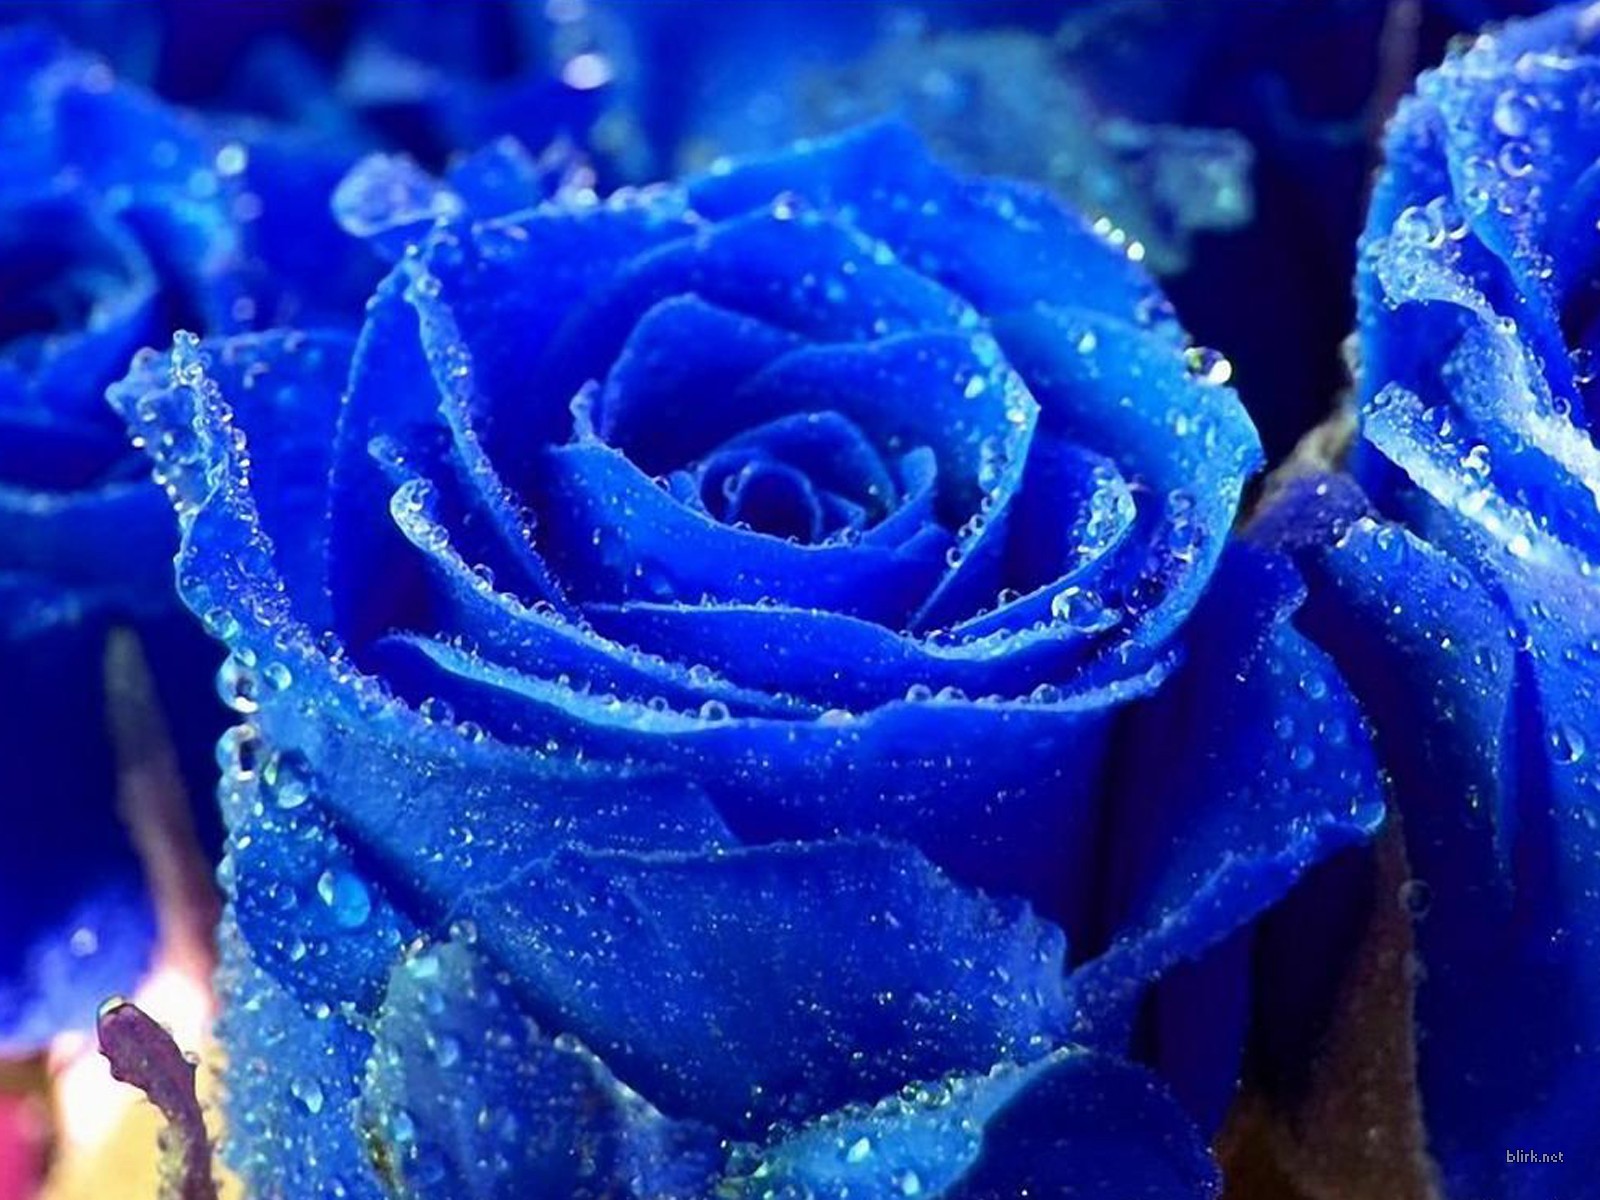 Pics obsession: Roses and Their Meanings